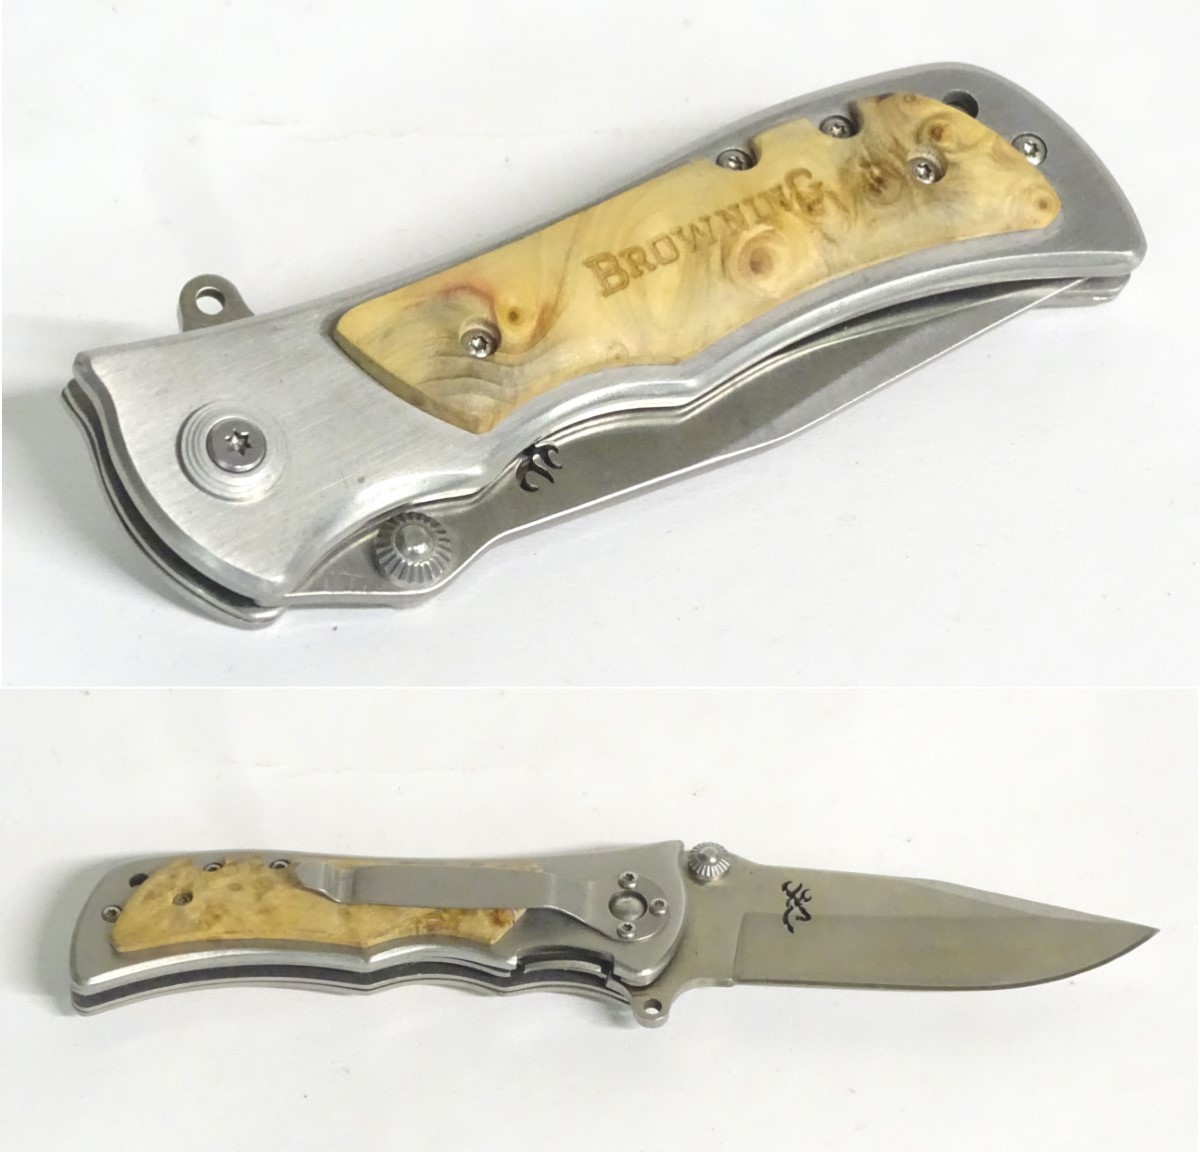 A Browning stainless steel skinning lock knife, with burr maple grips,